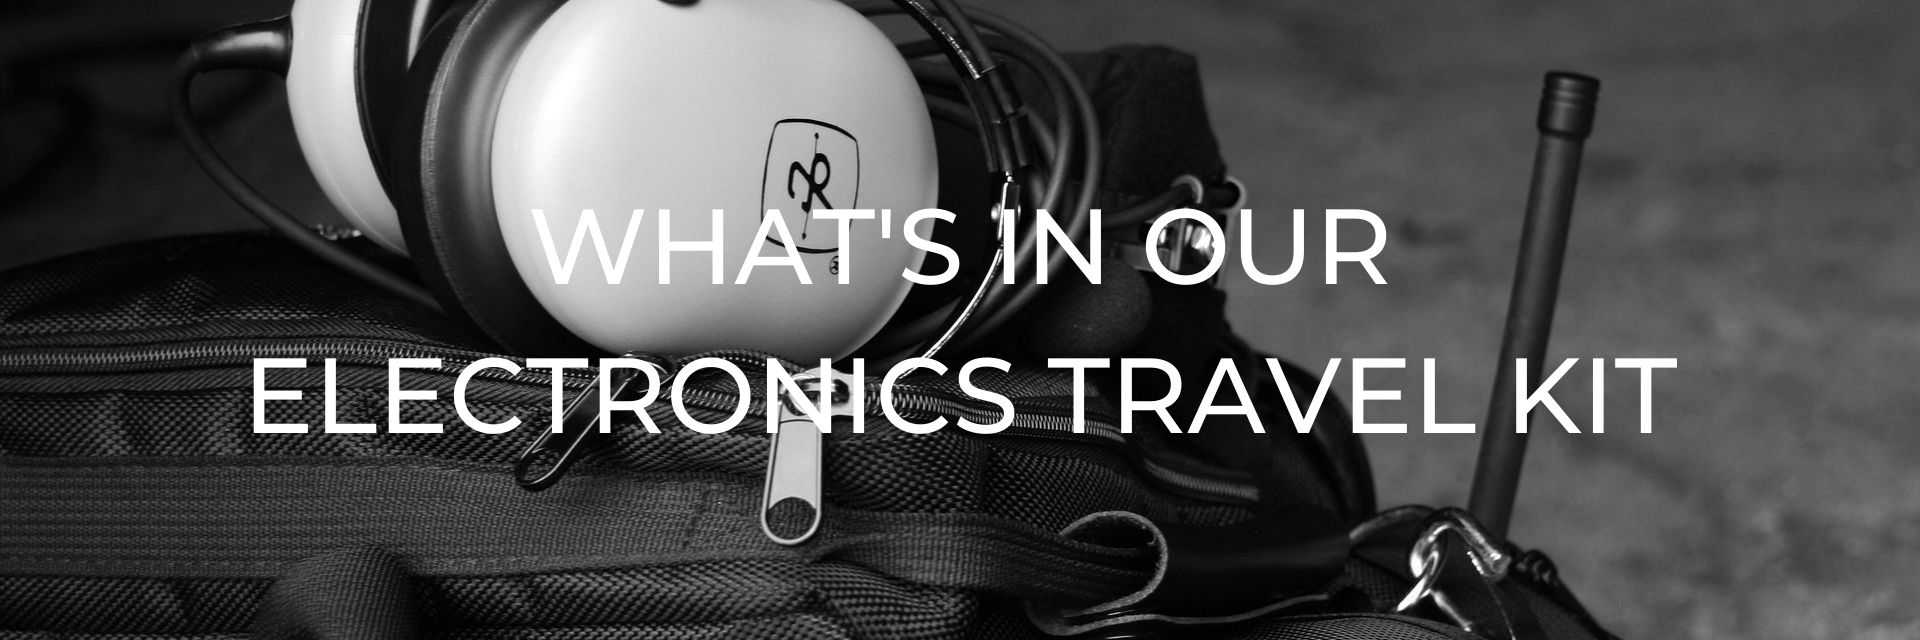 What's in Our Electronics Travel Kit Desktop Header